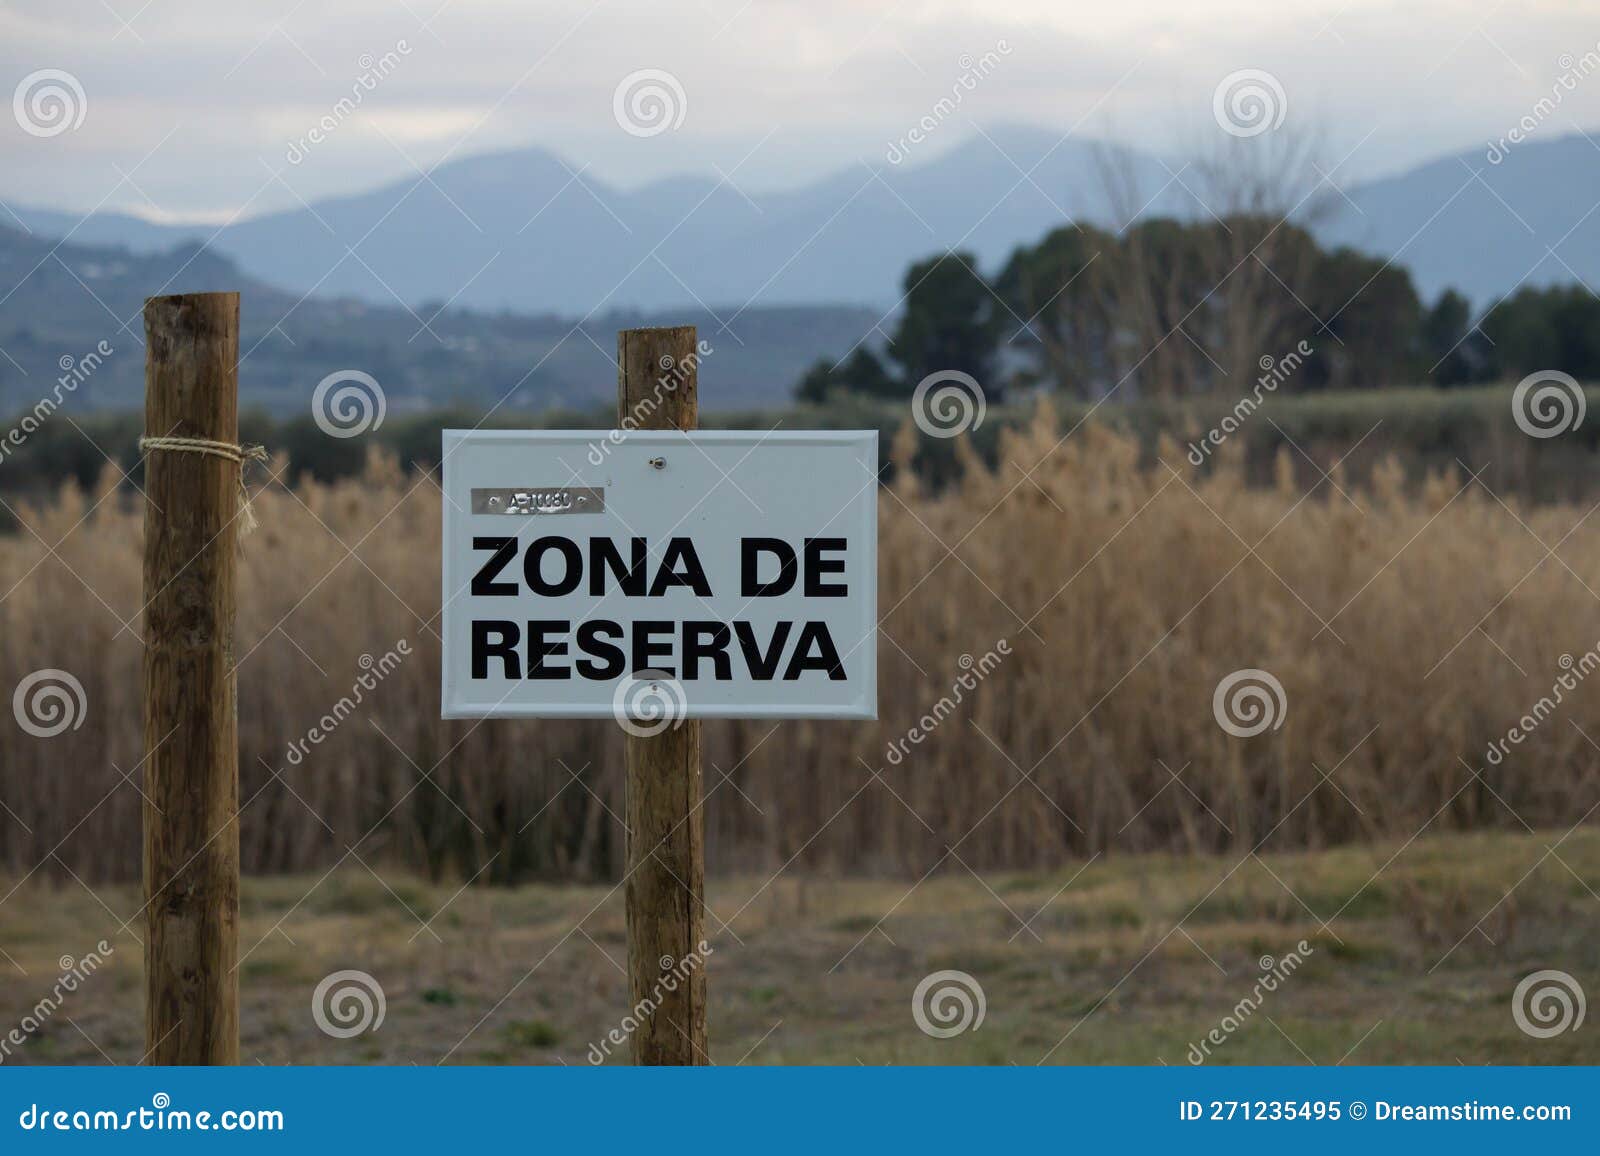 reserve zone sign